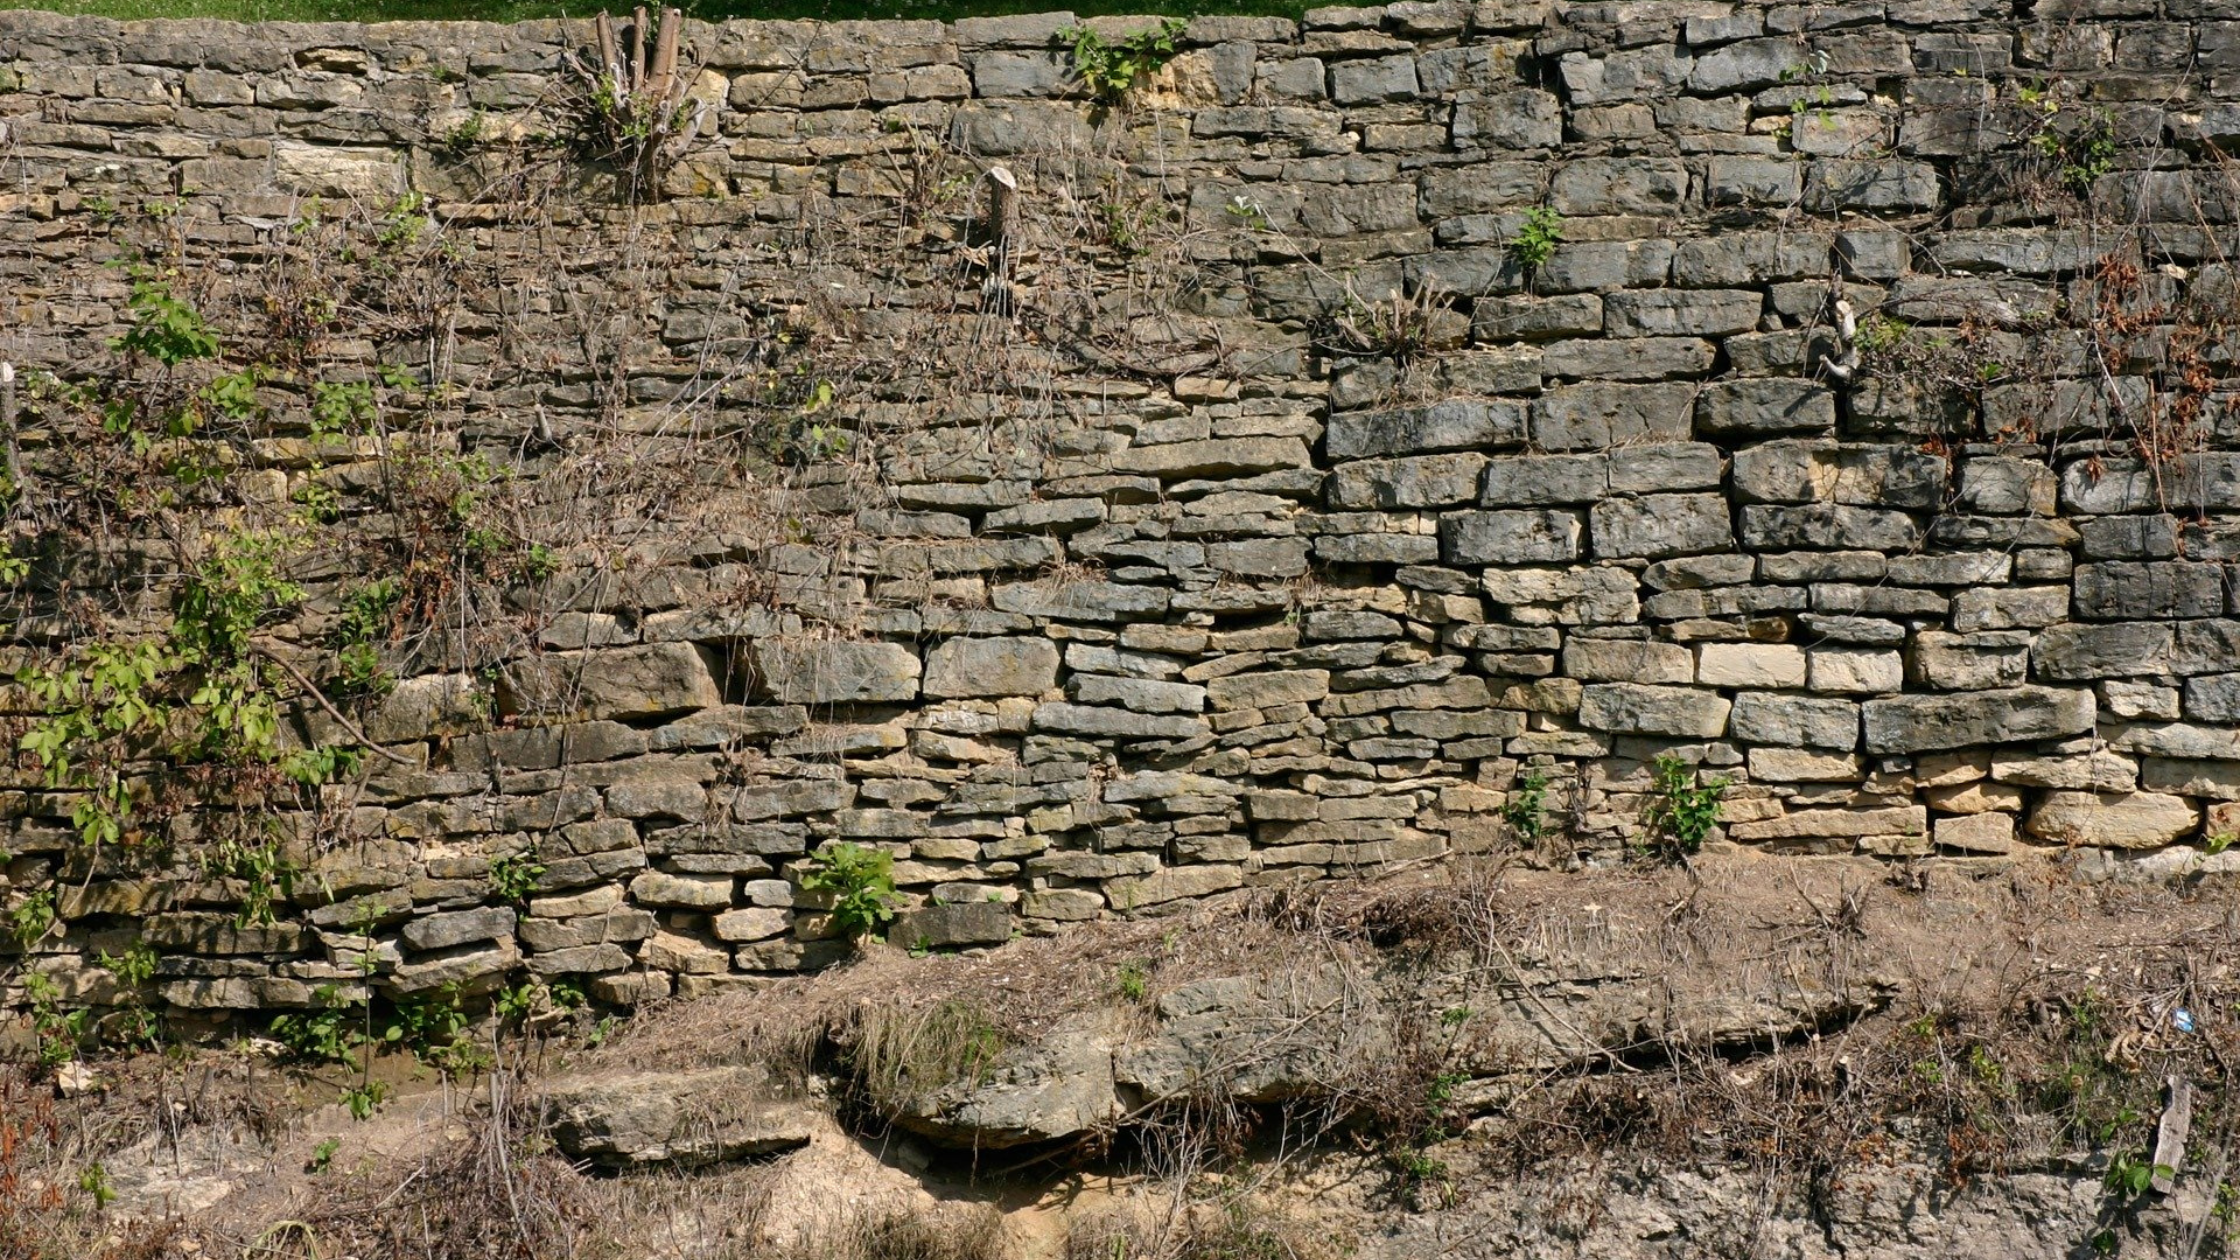 Image shows a rough stone wall with weeds growing in the cracks